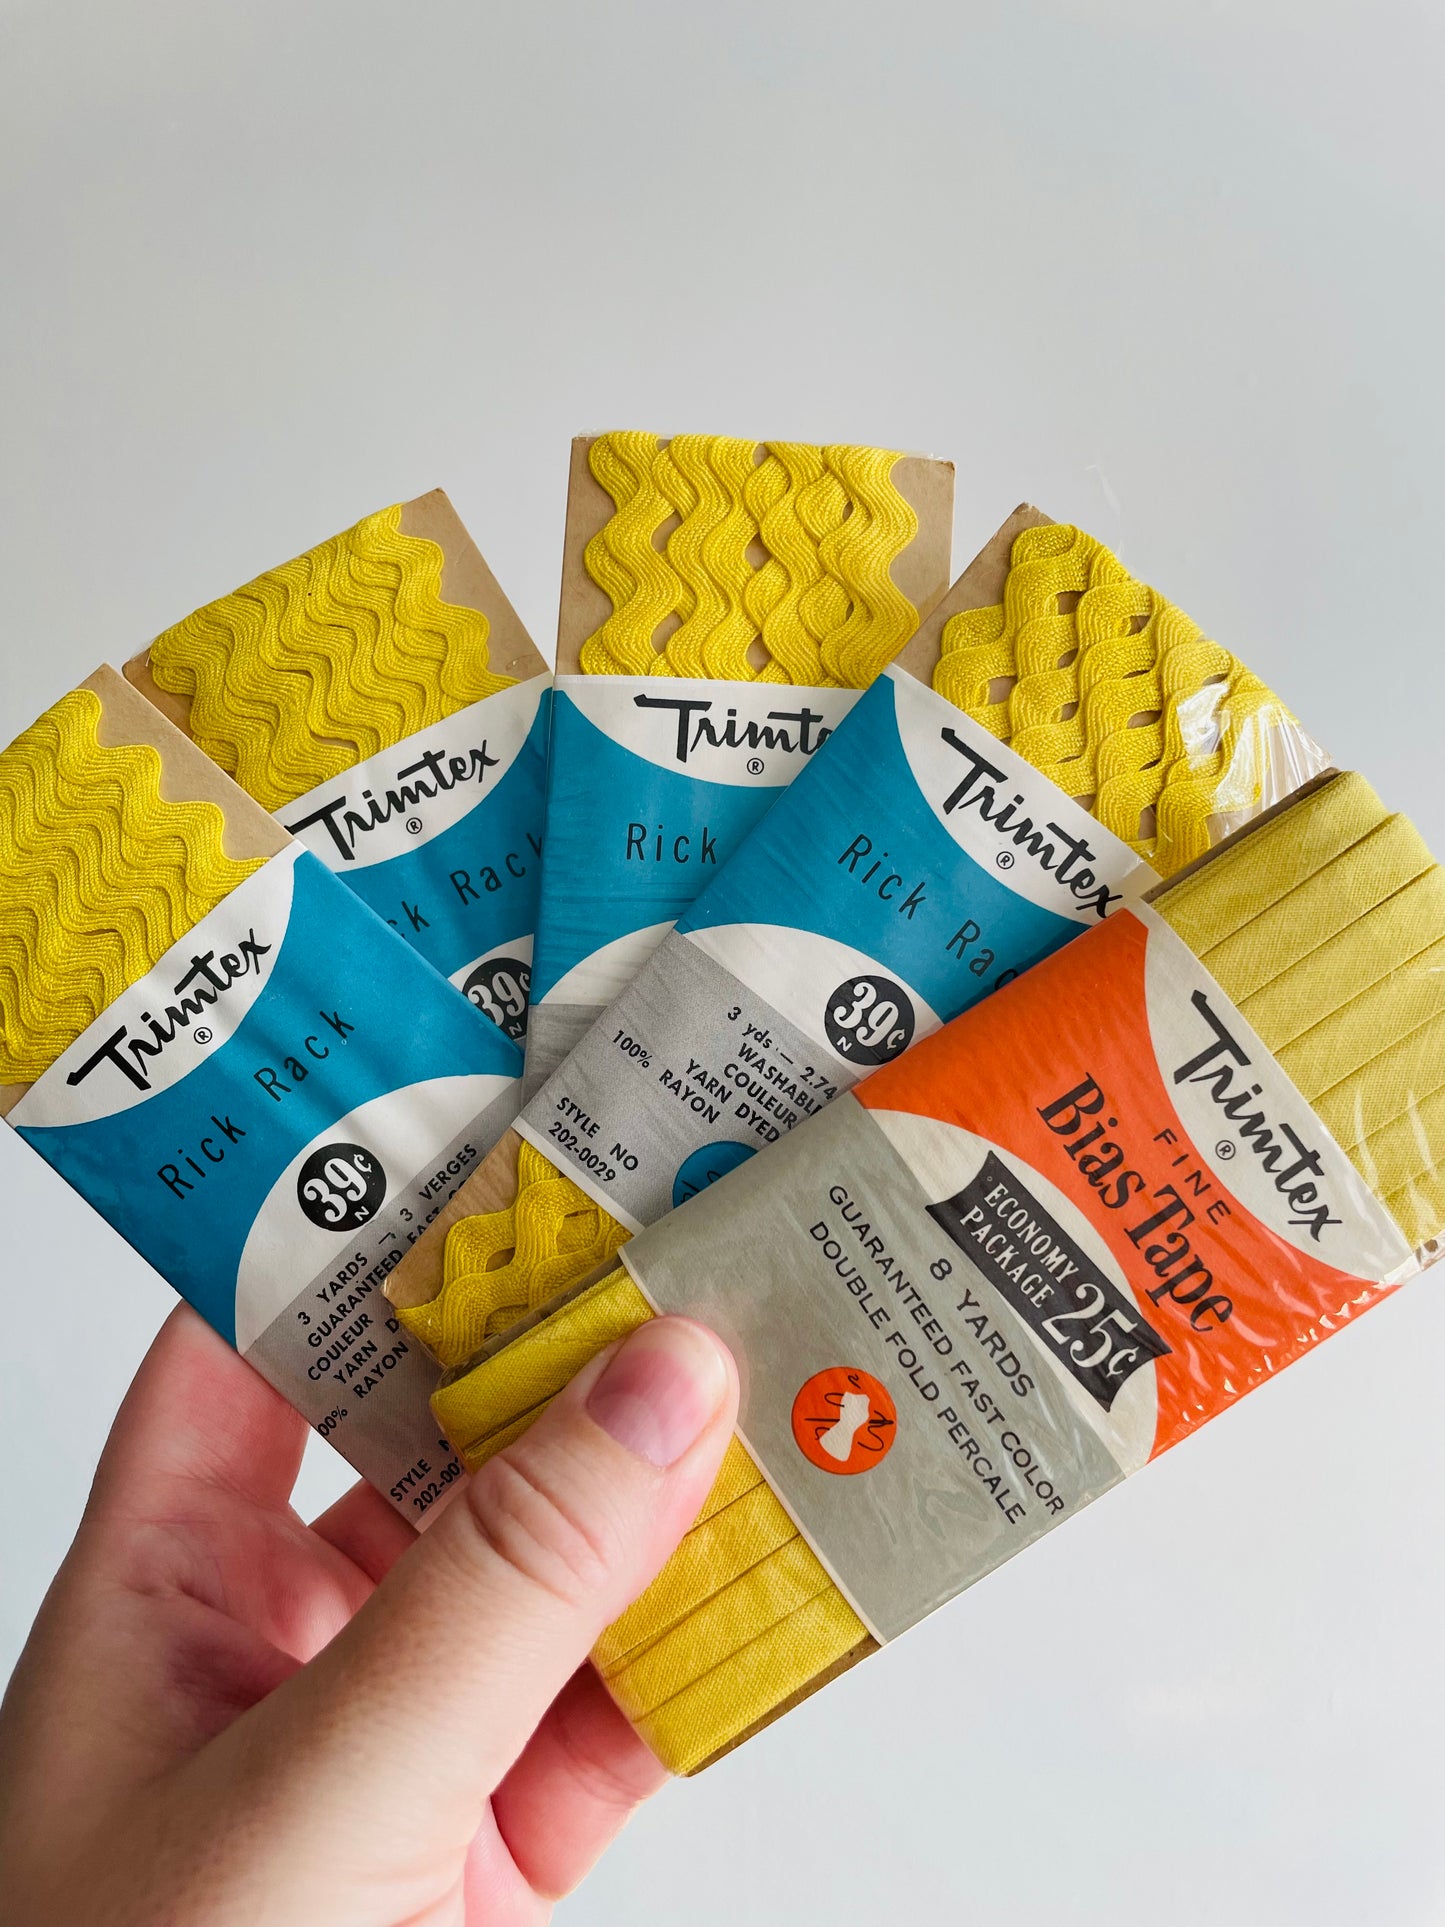 Shades of Yellow Trimtex Rick Rack & Double Fold Bias Tape - Brand New Vintage in Original Packaging - Set of 5